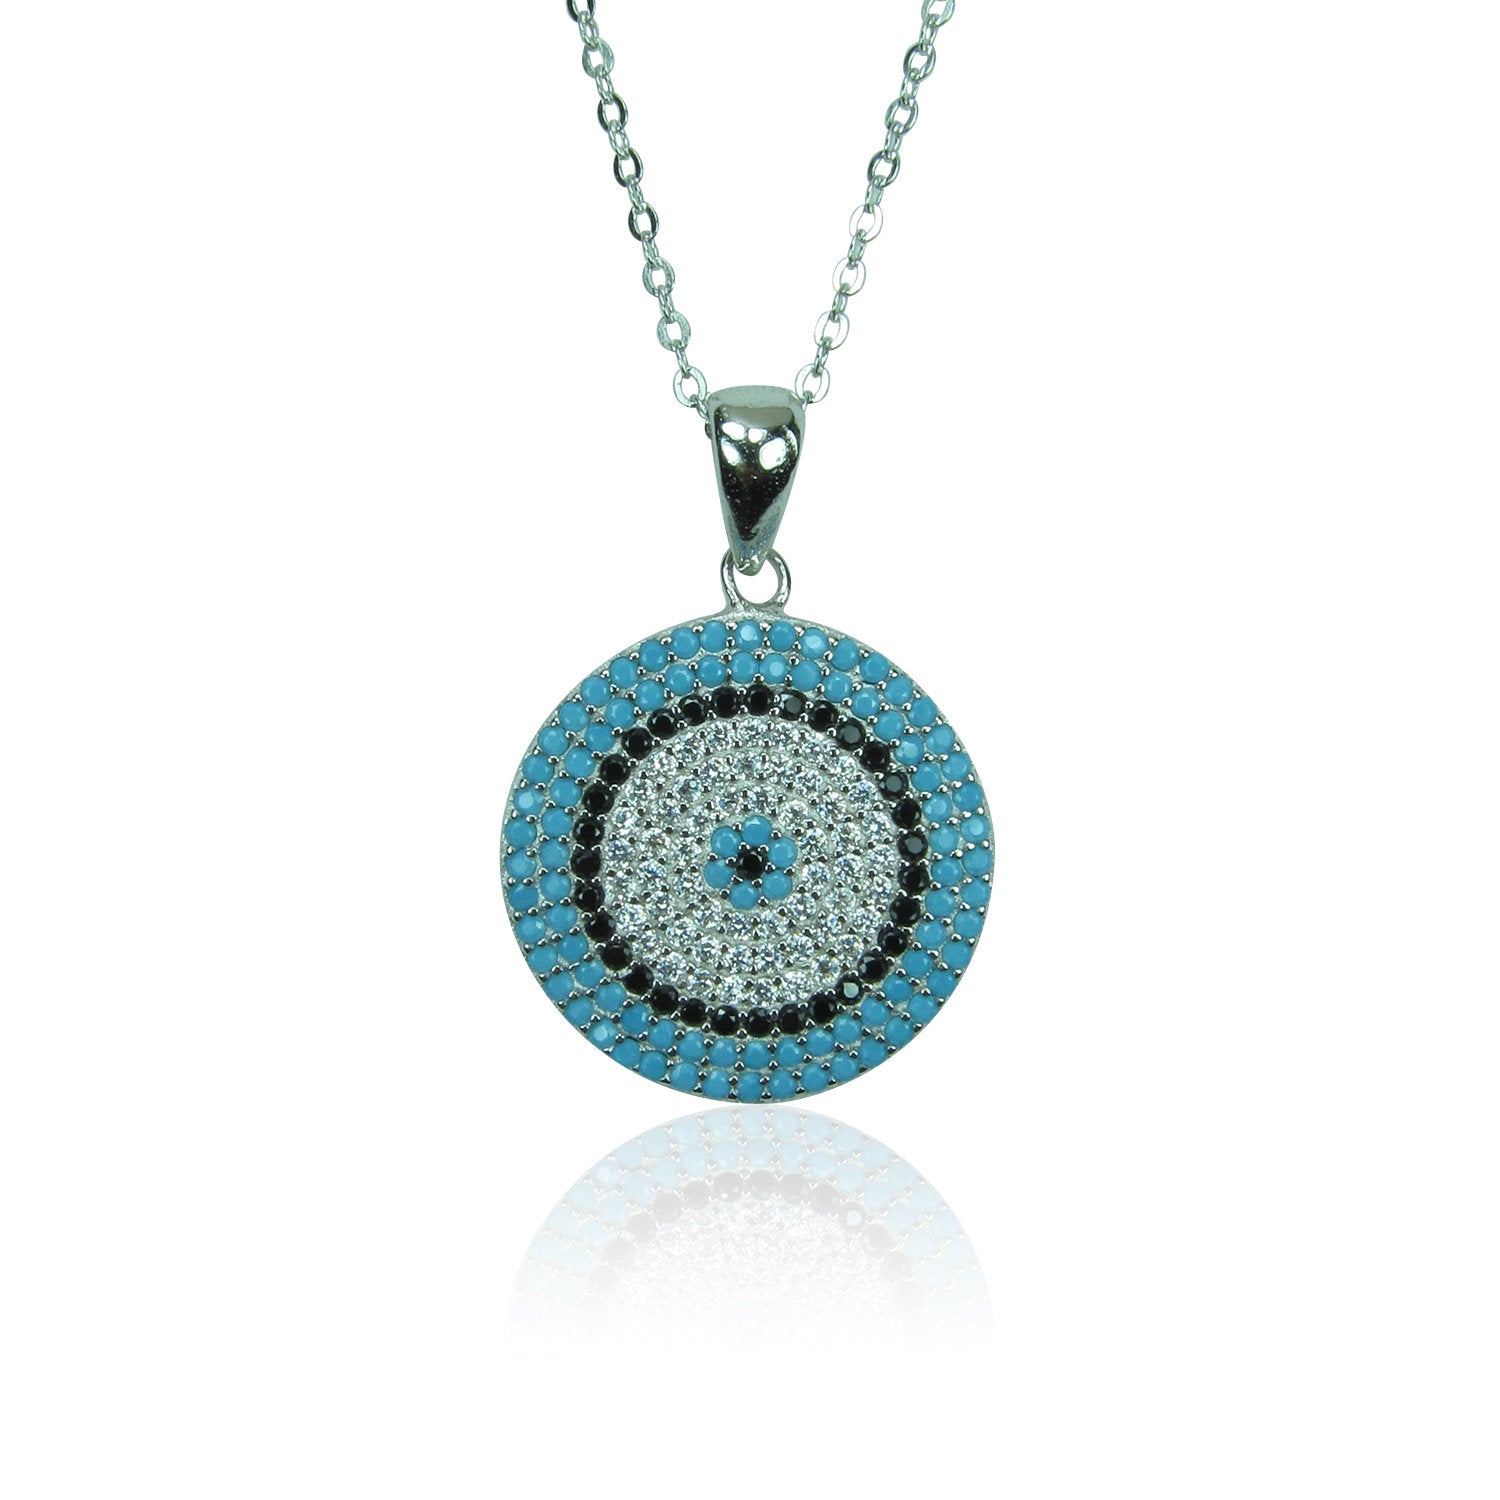 ROUND EYE DISK TURQUOISE STERLING SILVER NECKLACE